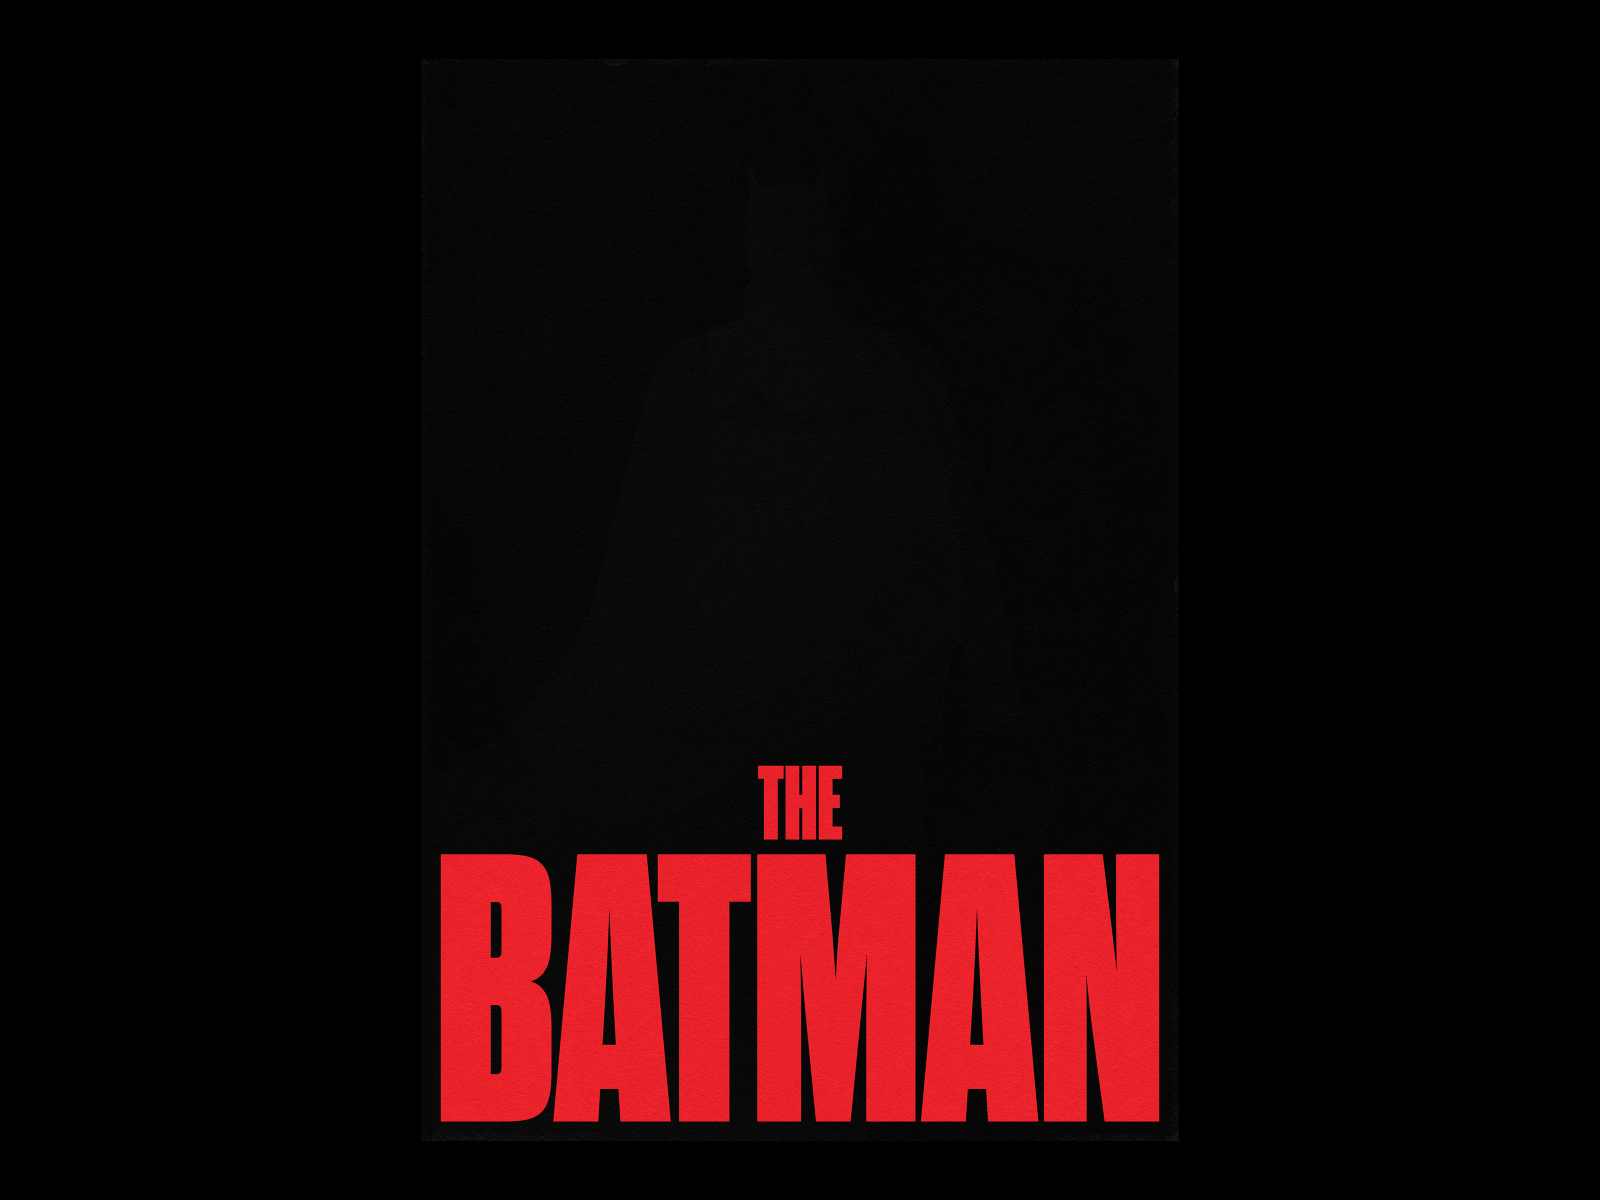 The Batman (Unofficial) by Brad Mead on Dribbble